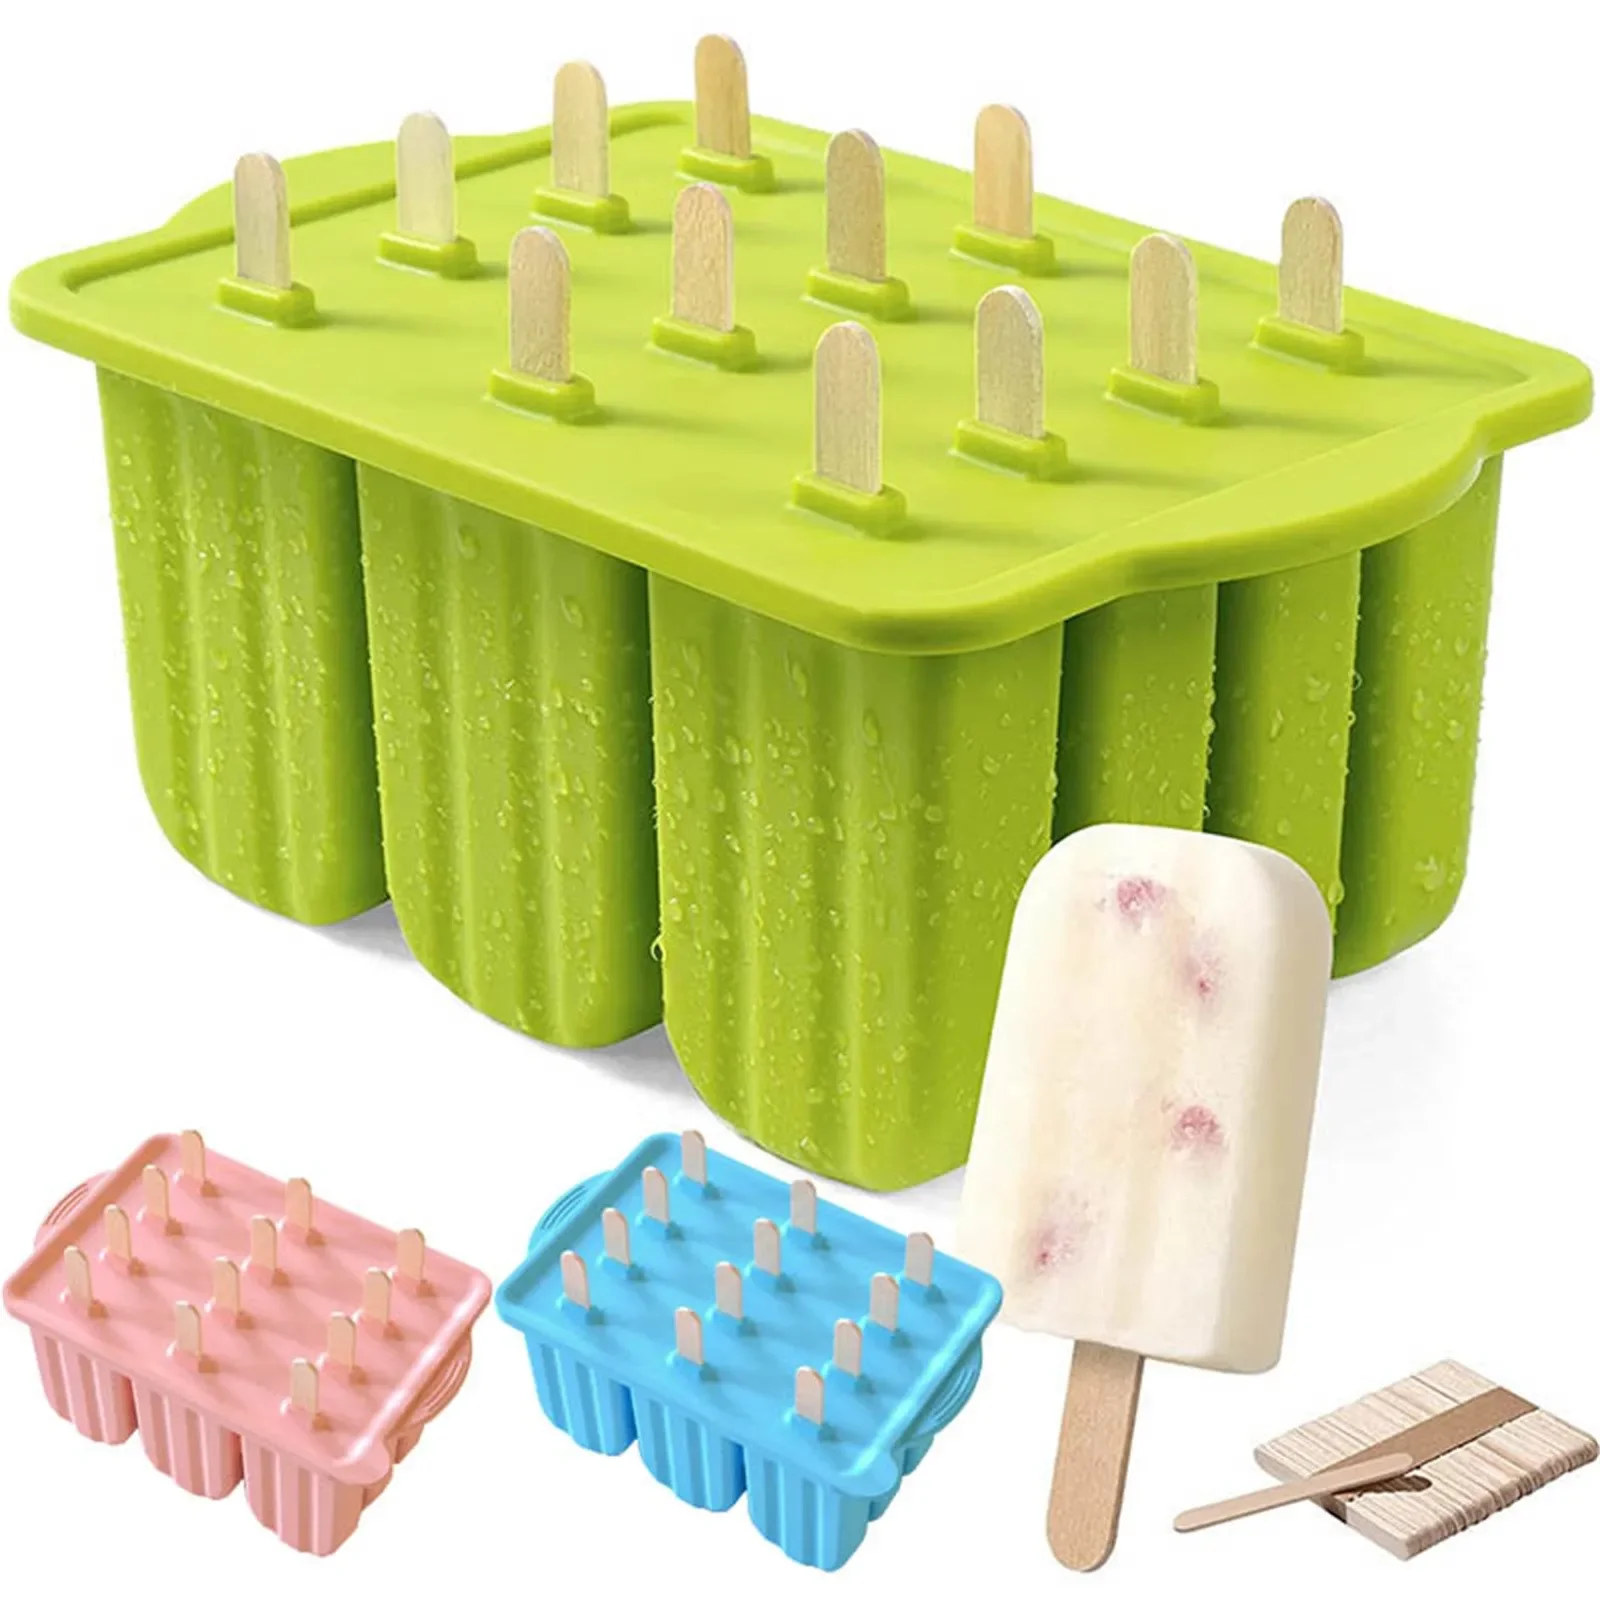 

2024 New Summer Silicone Popsicles Molds,12 PCS DIY Homemade Cube Maker,Easy-Release BPA-free Ice Cream Pop with 50PCS Sticks